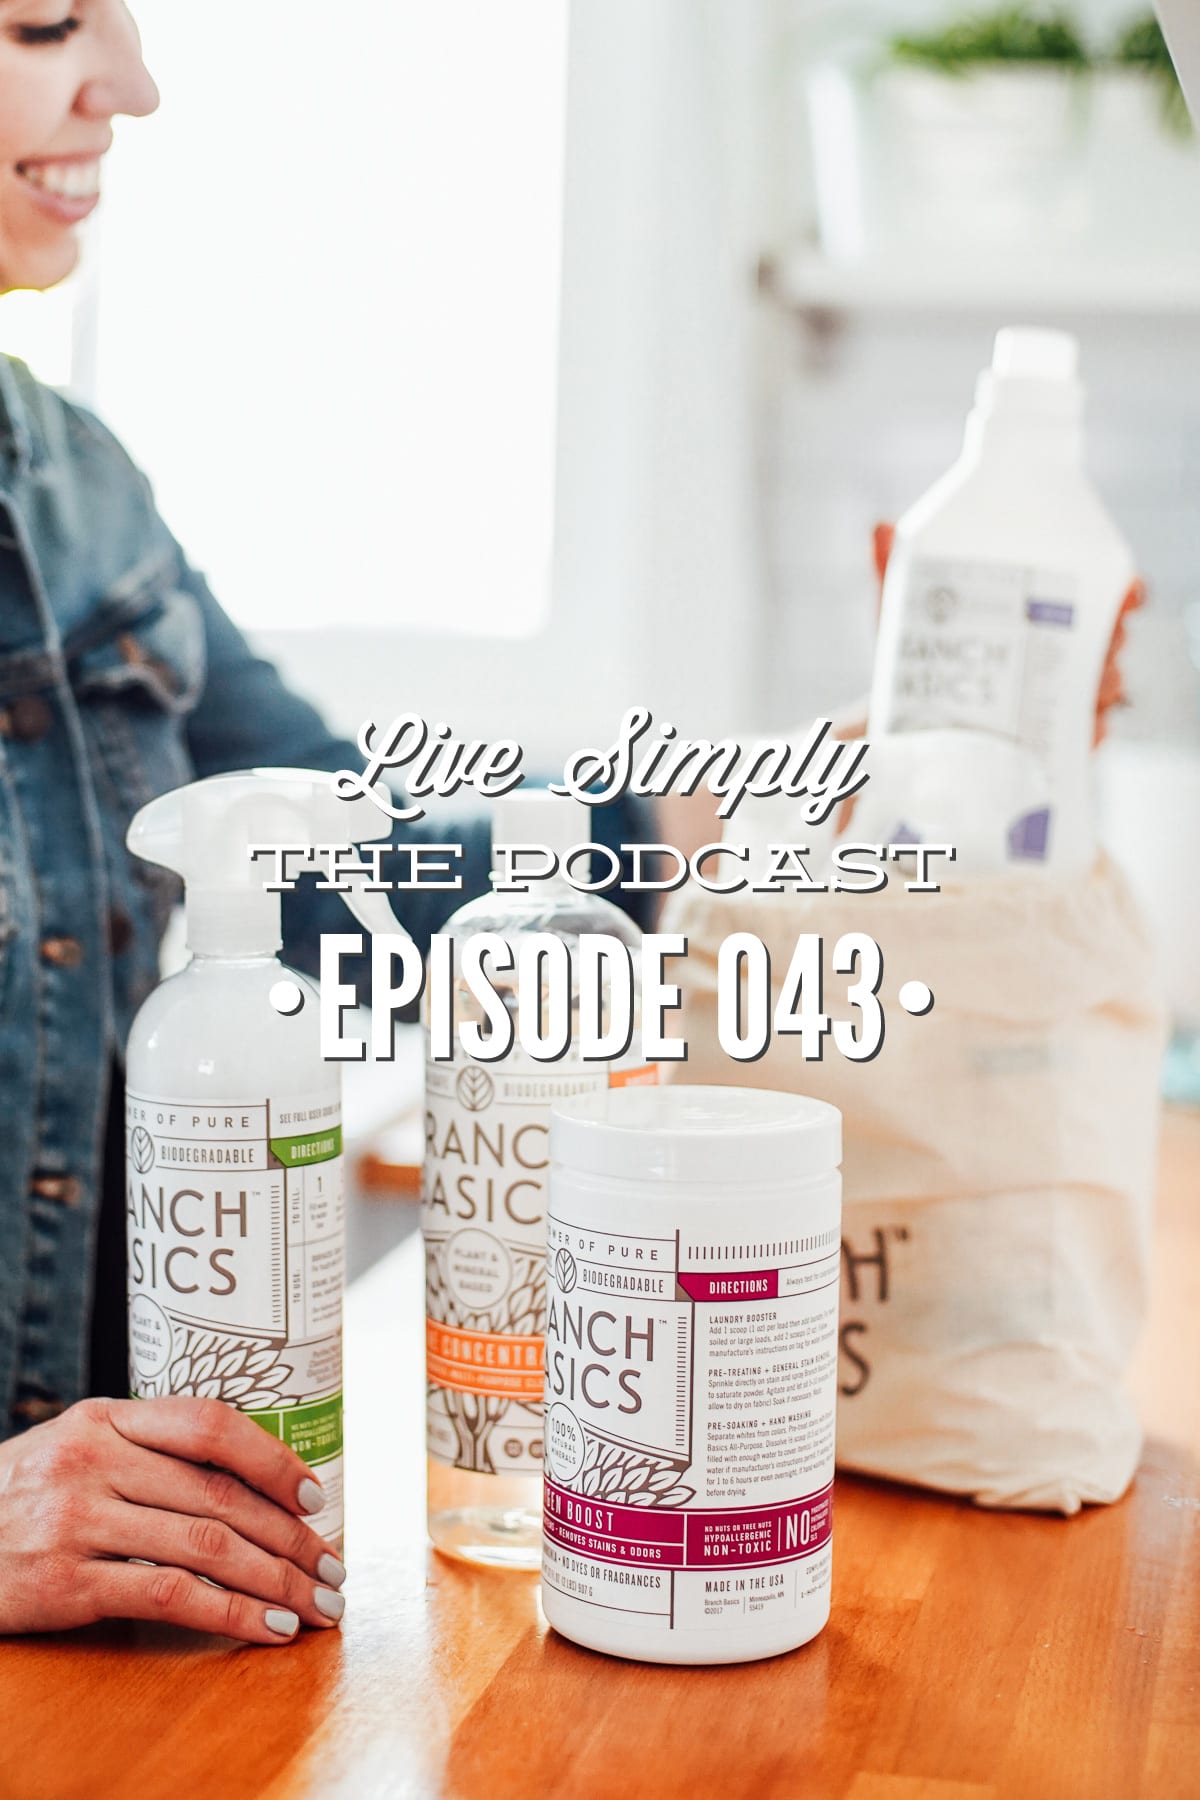 Podcast 043: How to Make the Switch to Non-Toxic Cleaning Products with Allison from Branch Basics